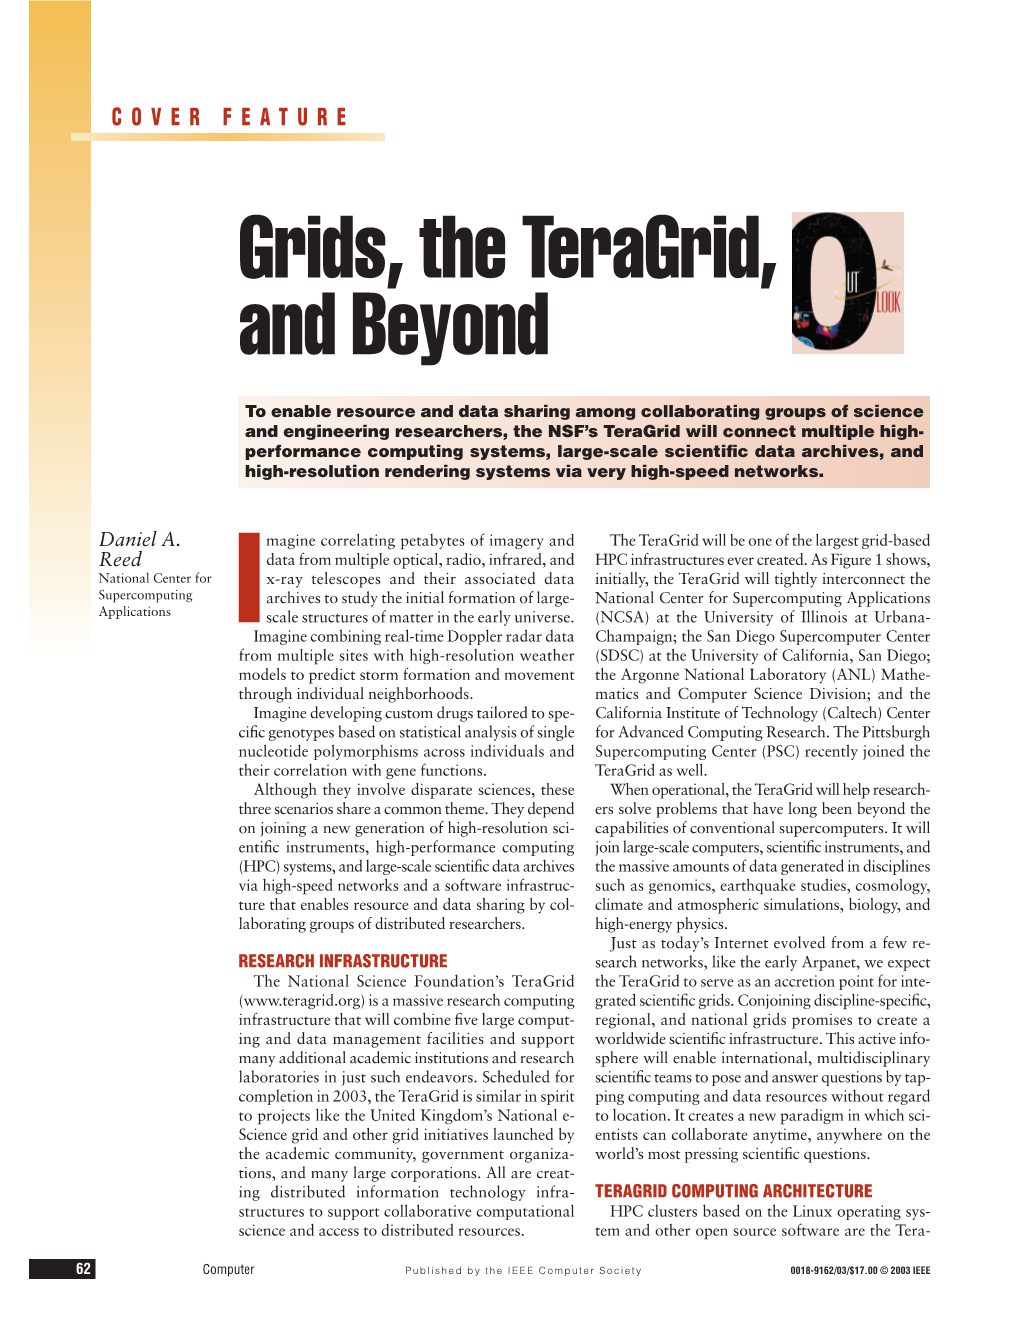 Grids, the Teragrid, and Beyond